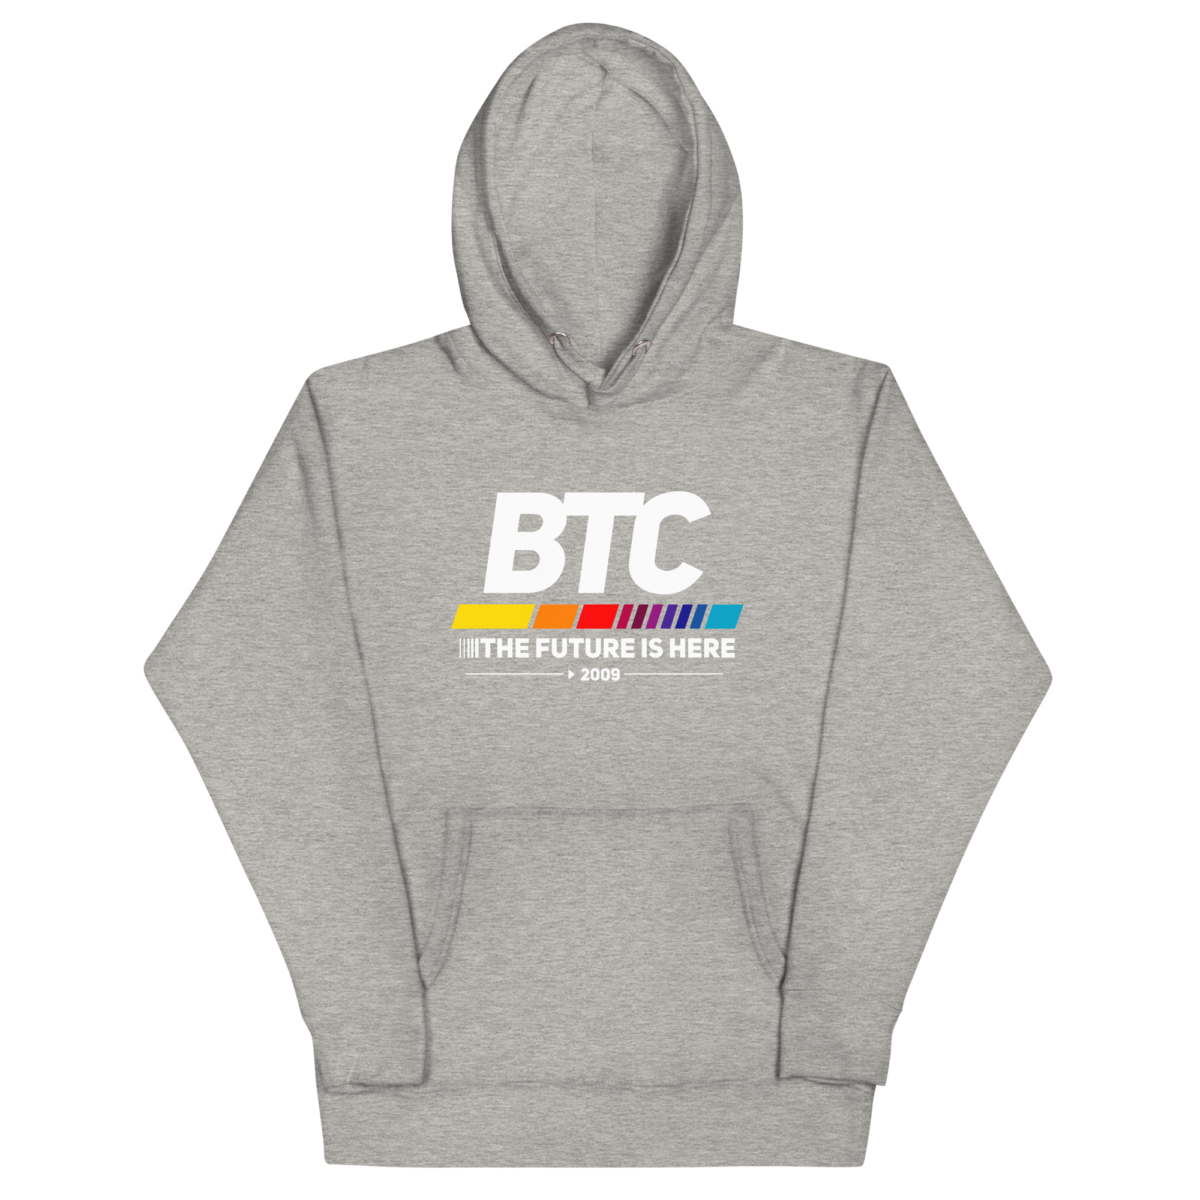 unisex premium hoodie carbon grey front 633d807119555 - Bitcoin: The Future Is Here Hoodie